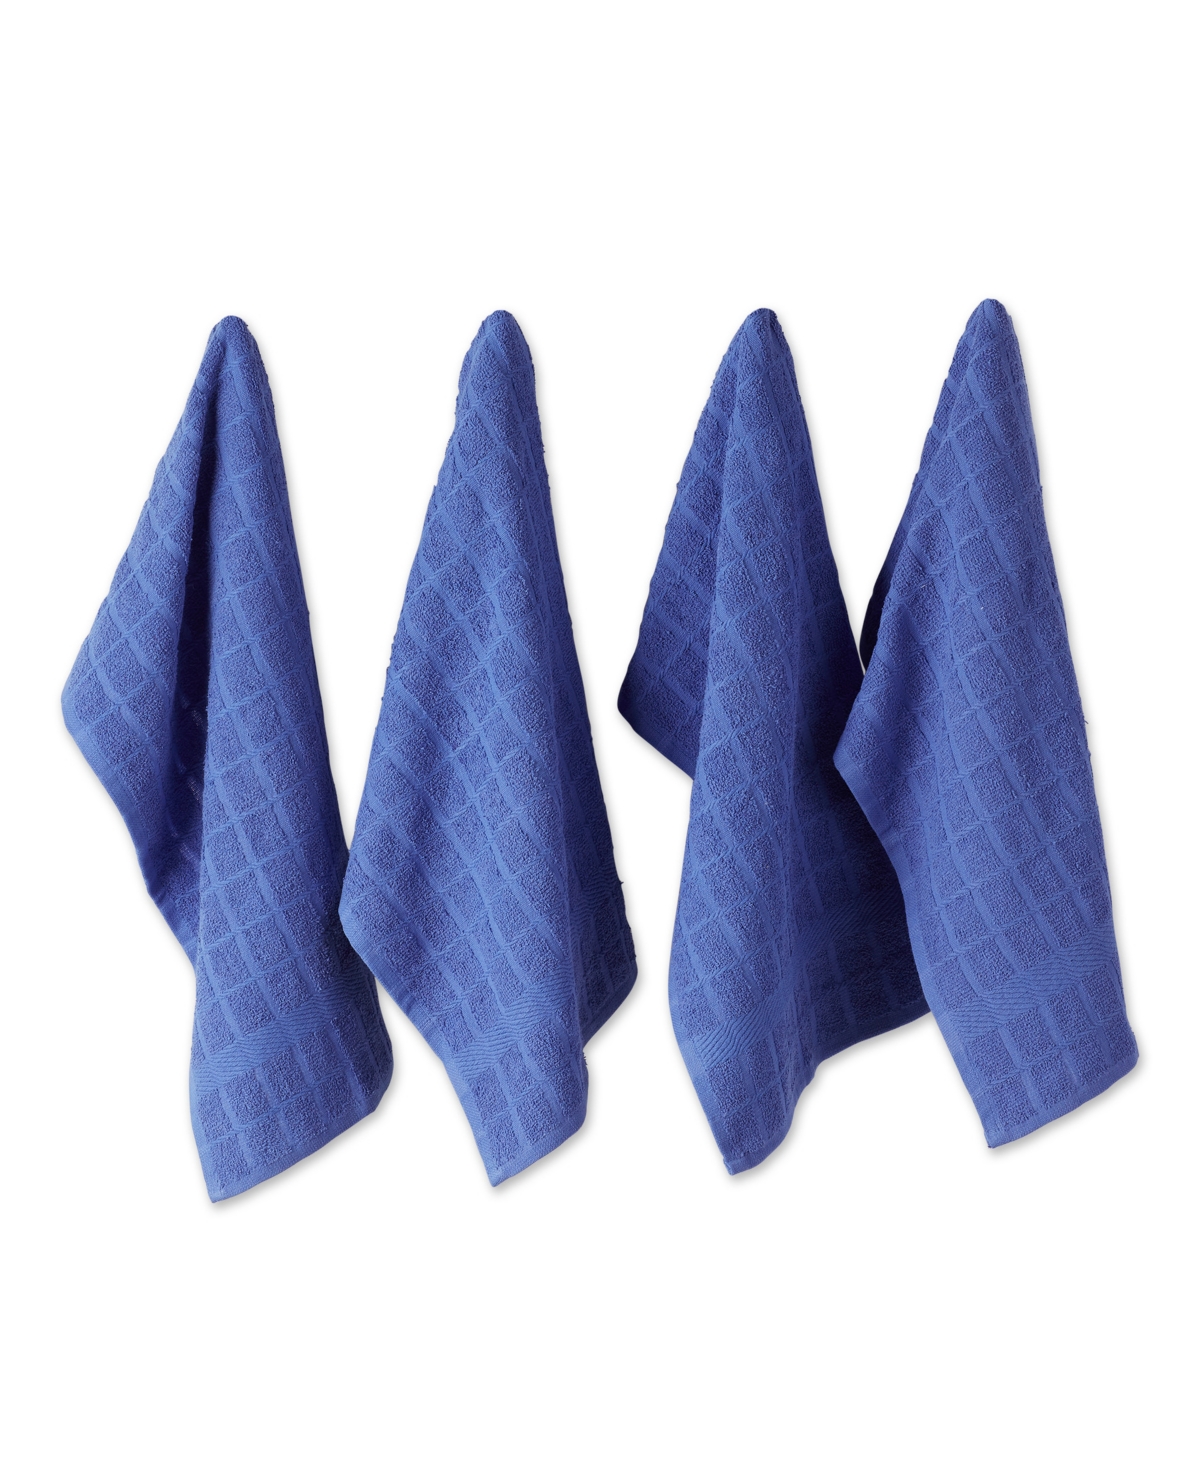 Basic Terry Collection Windowpane Dishtowel Set, 16x26", Blueberry Solid, 4 Piece - Blueberry Solid